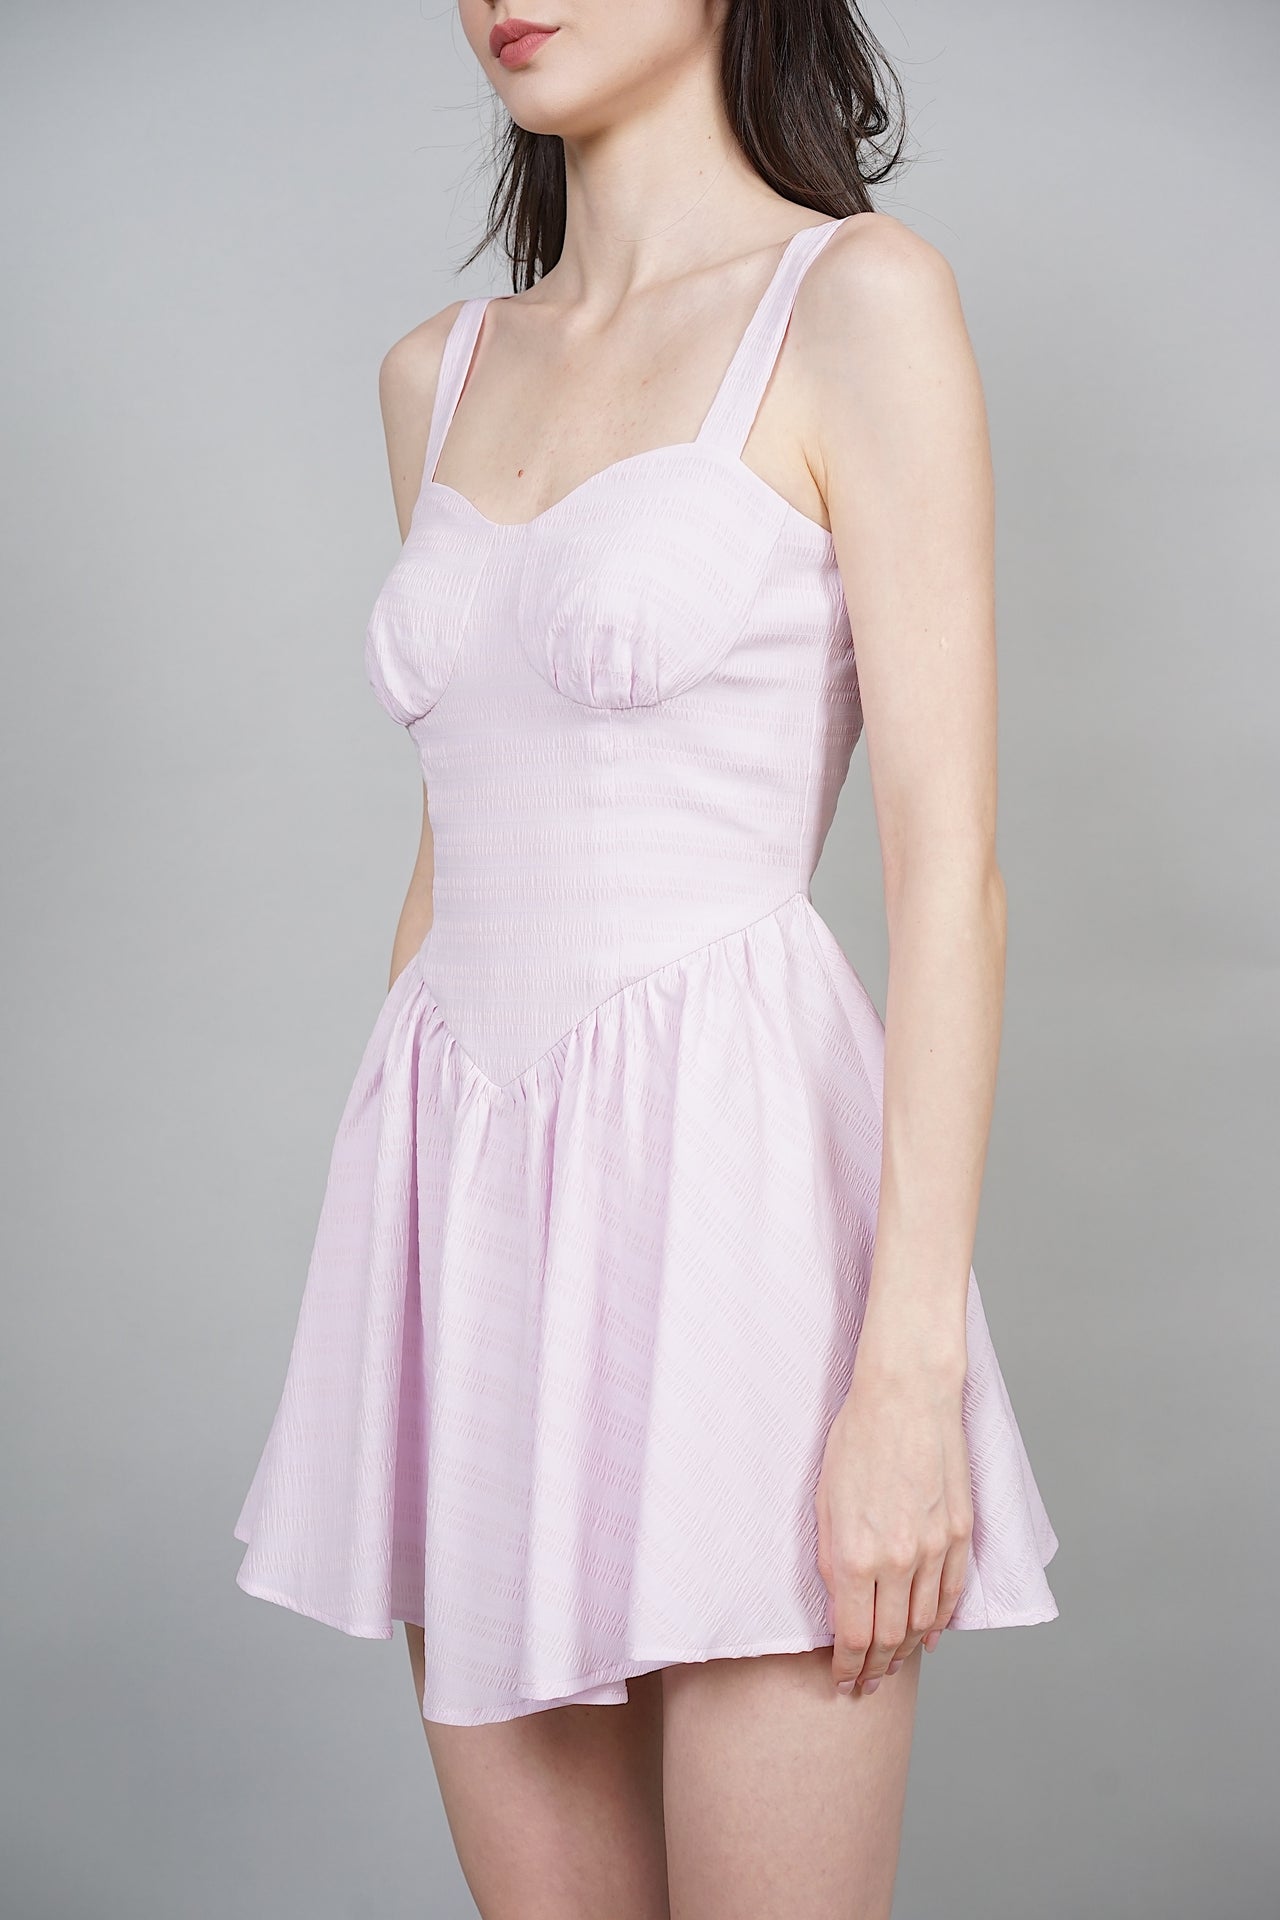 Wengie Gathered Romper in Lilac - Arriving Soon